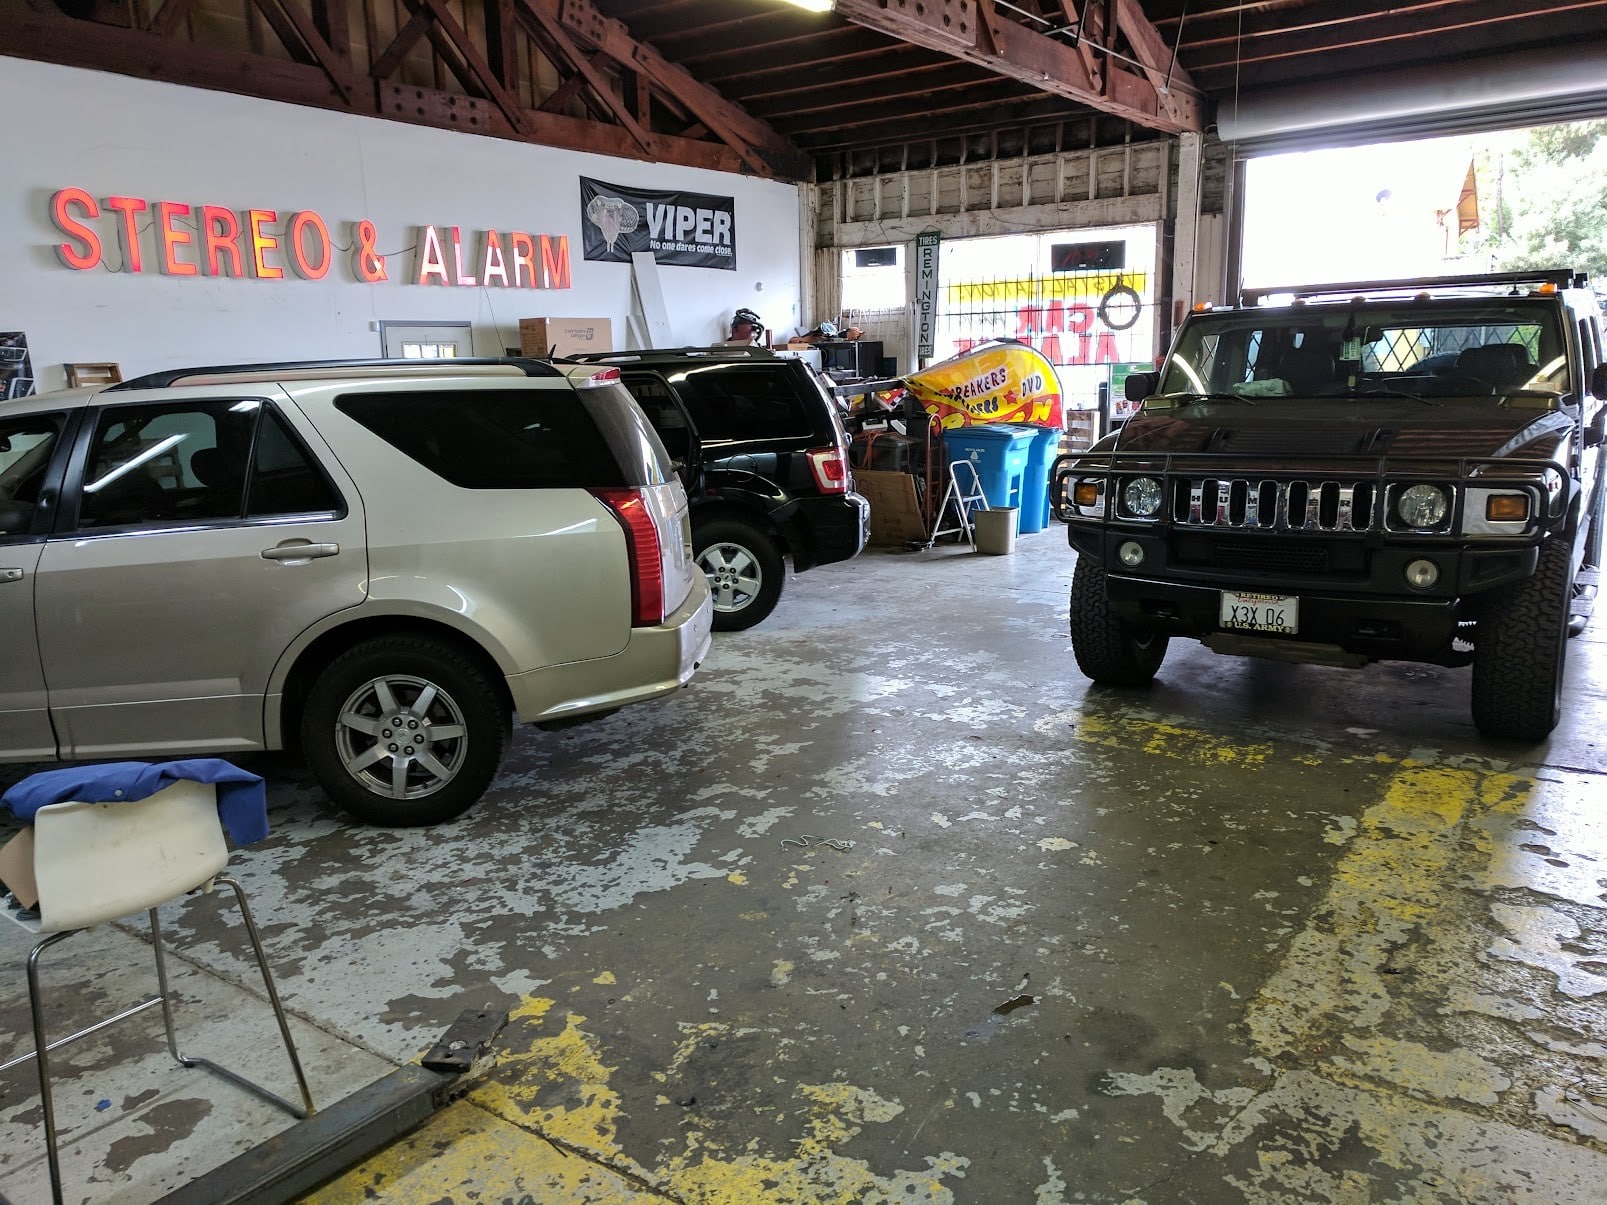 Garage Interior with Cars